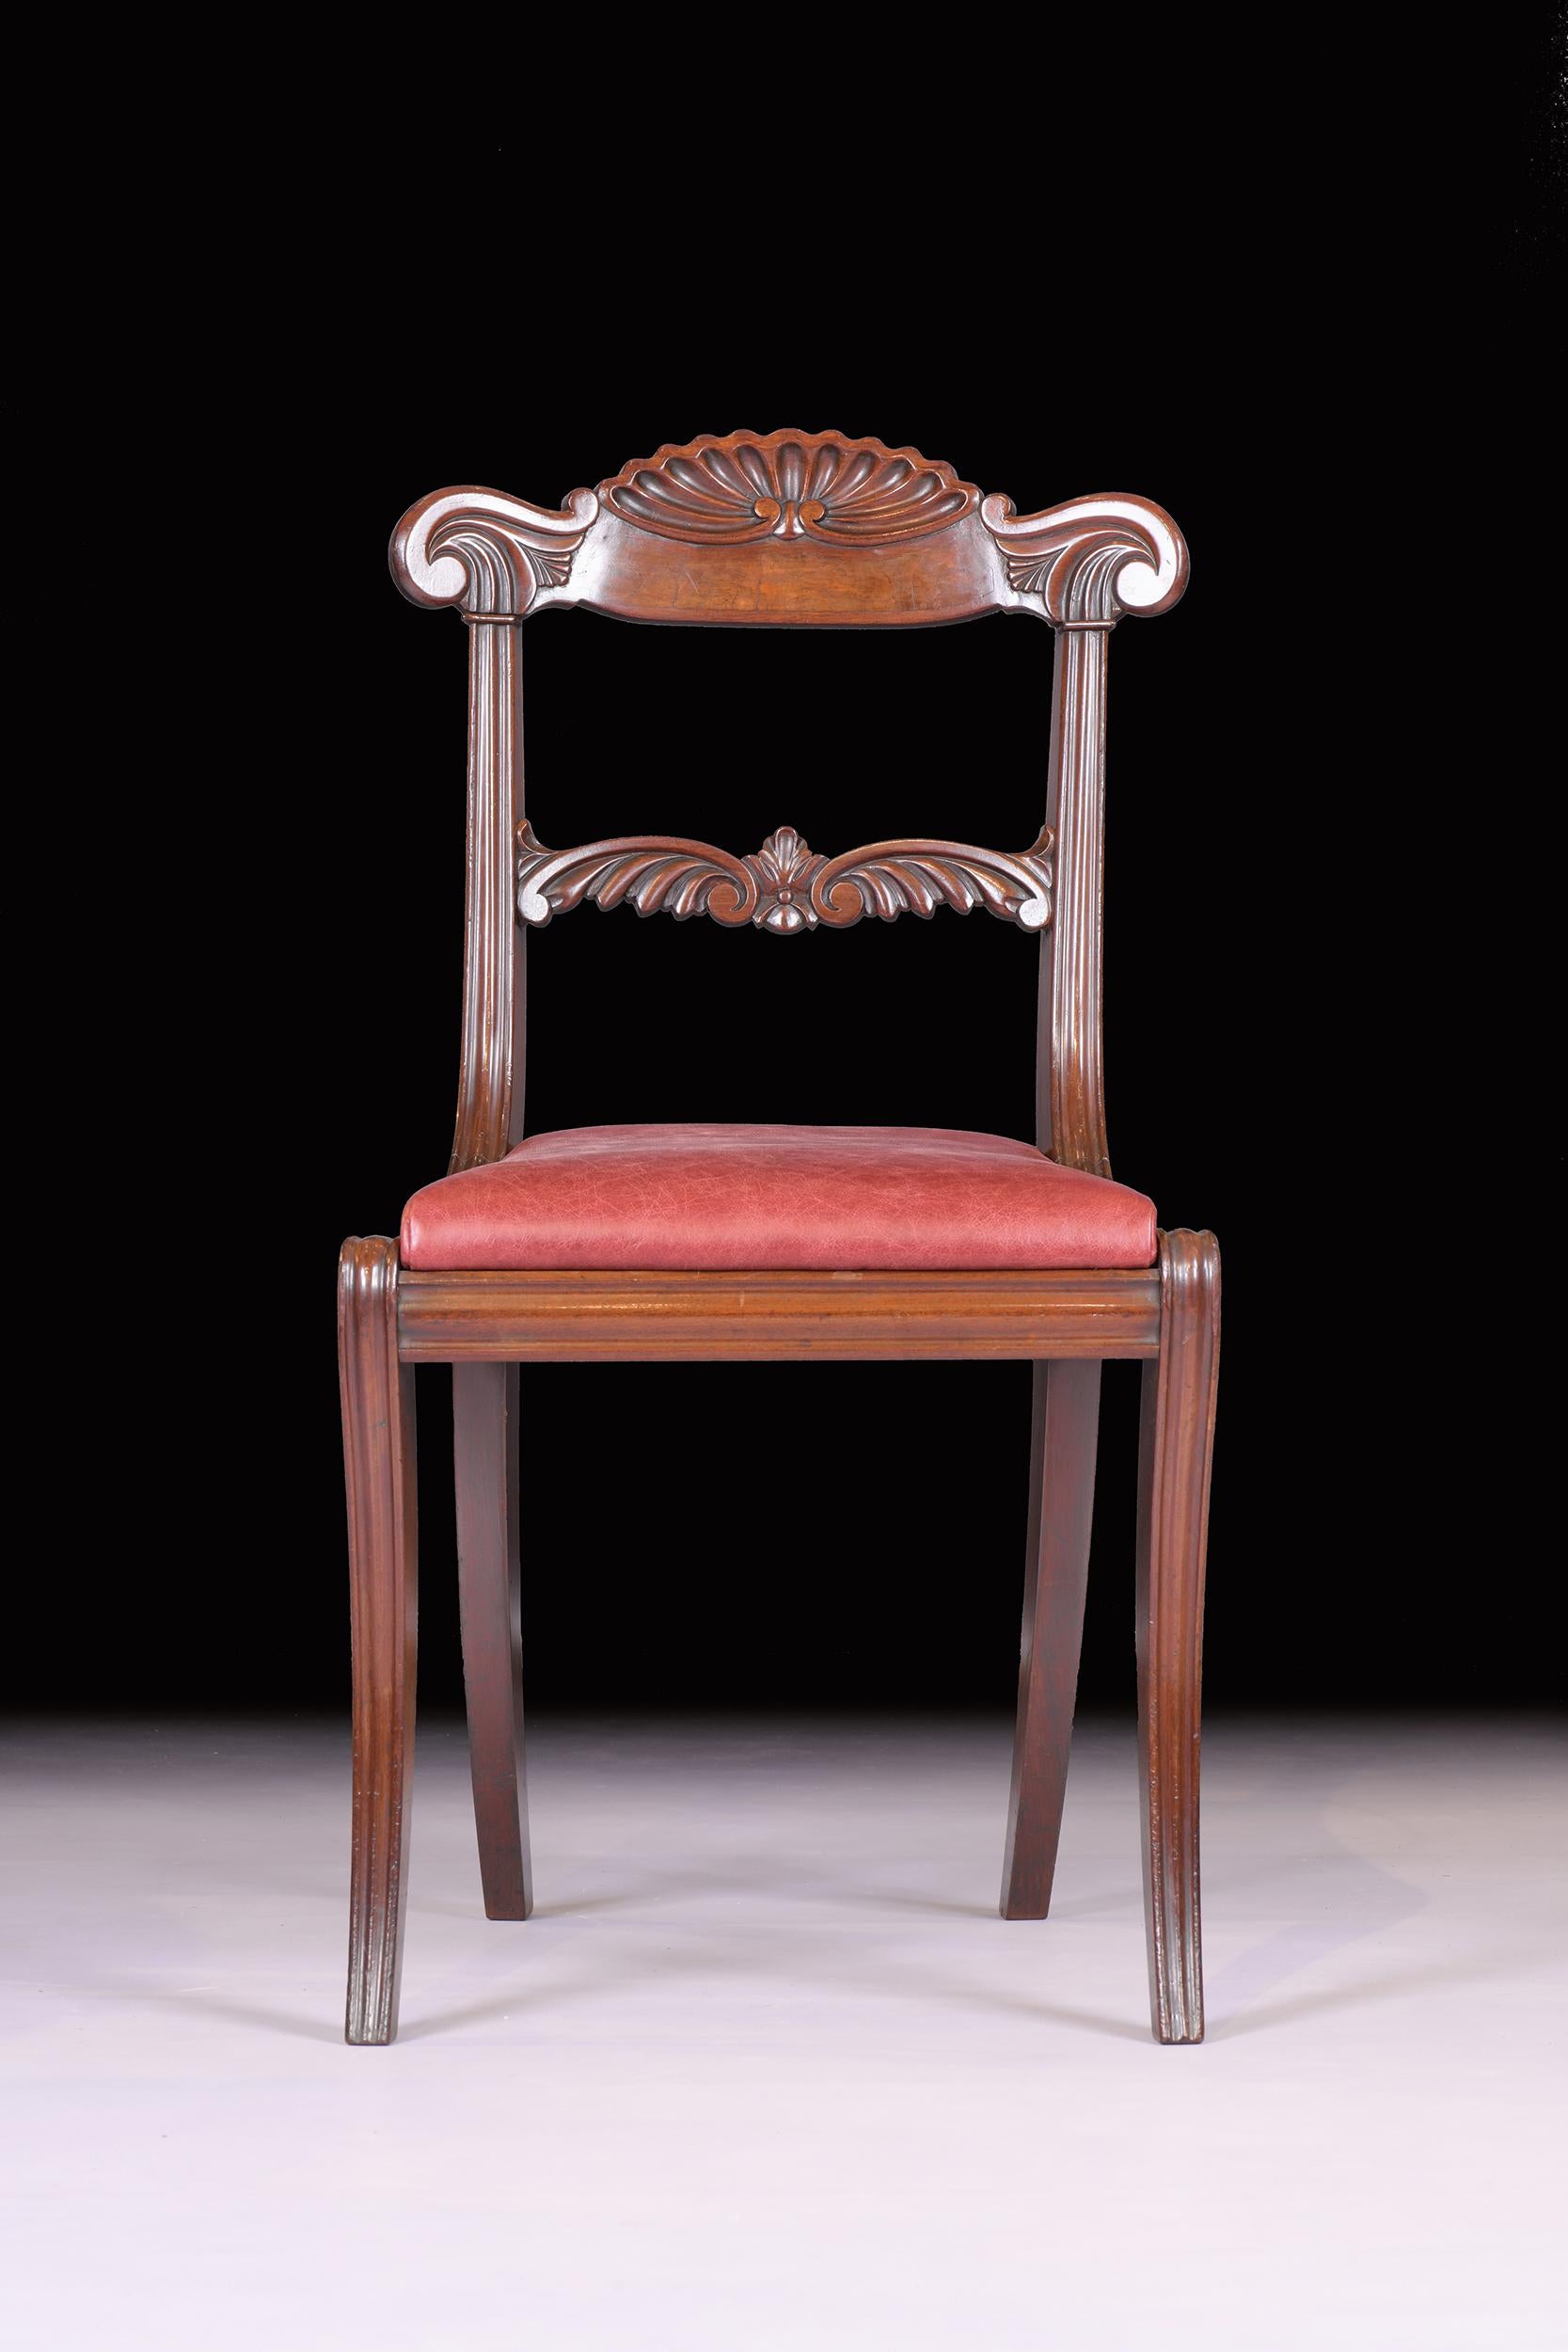 Set of 10 Early 19th Century Regency Mahogany Dining Room Chairs For Sale 2